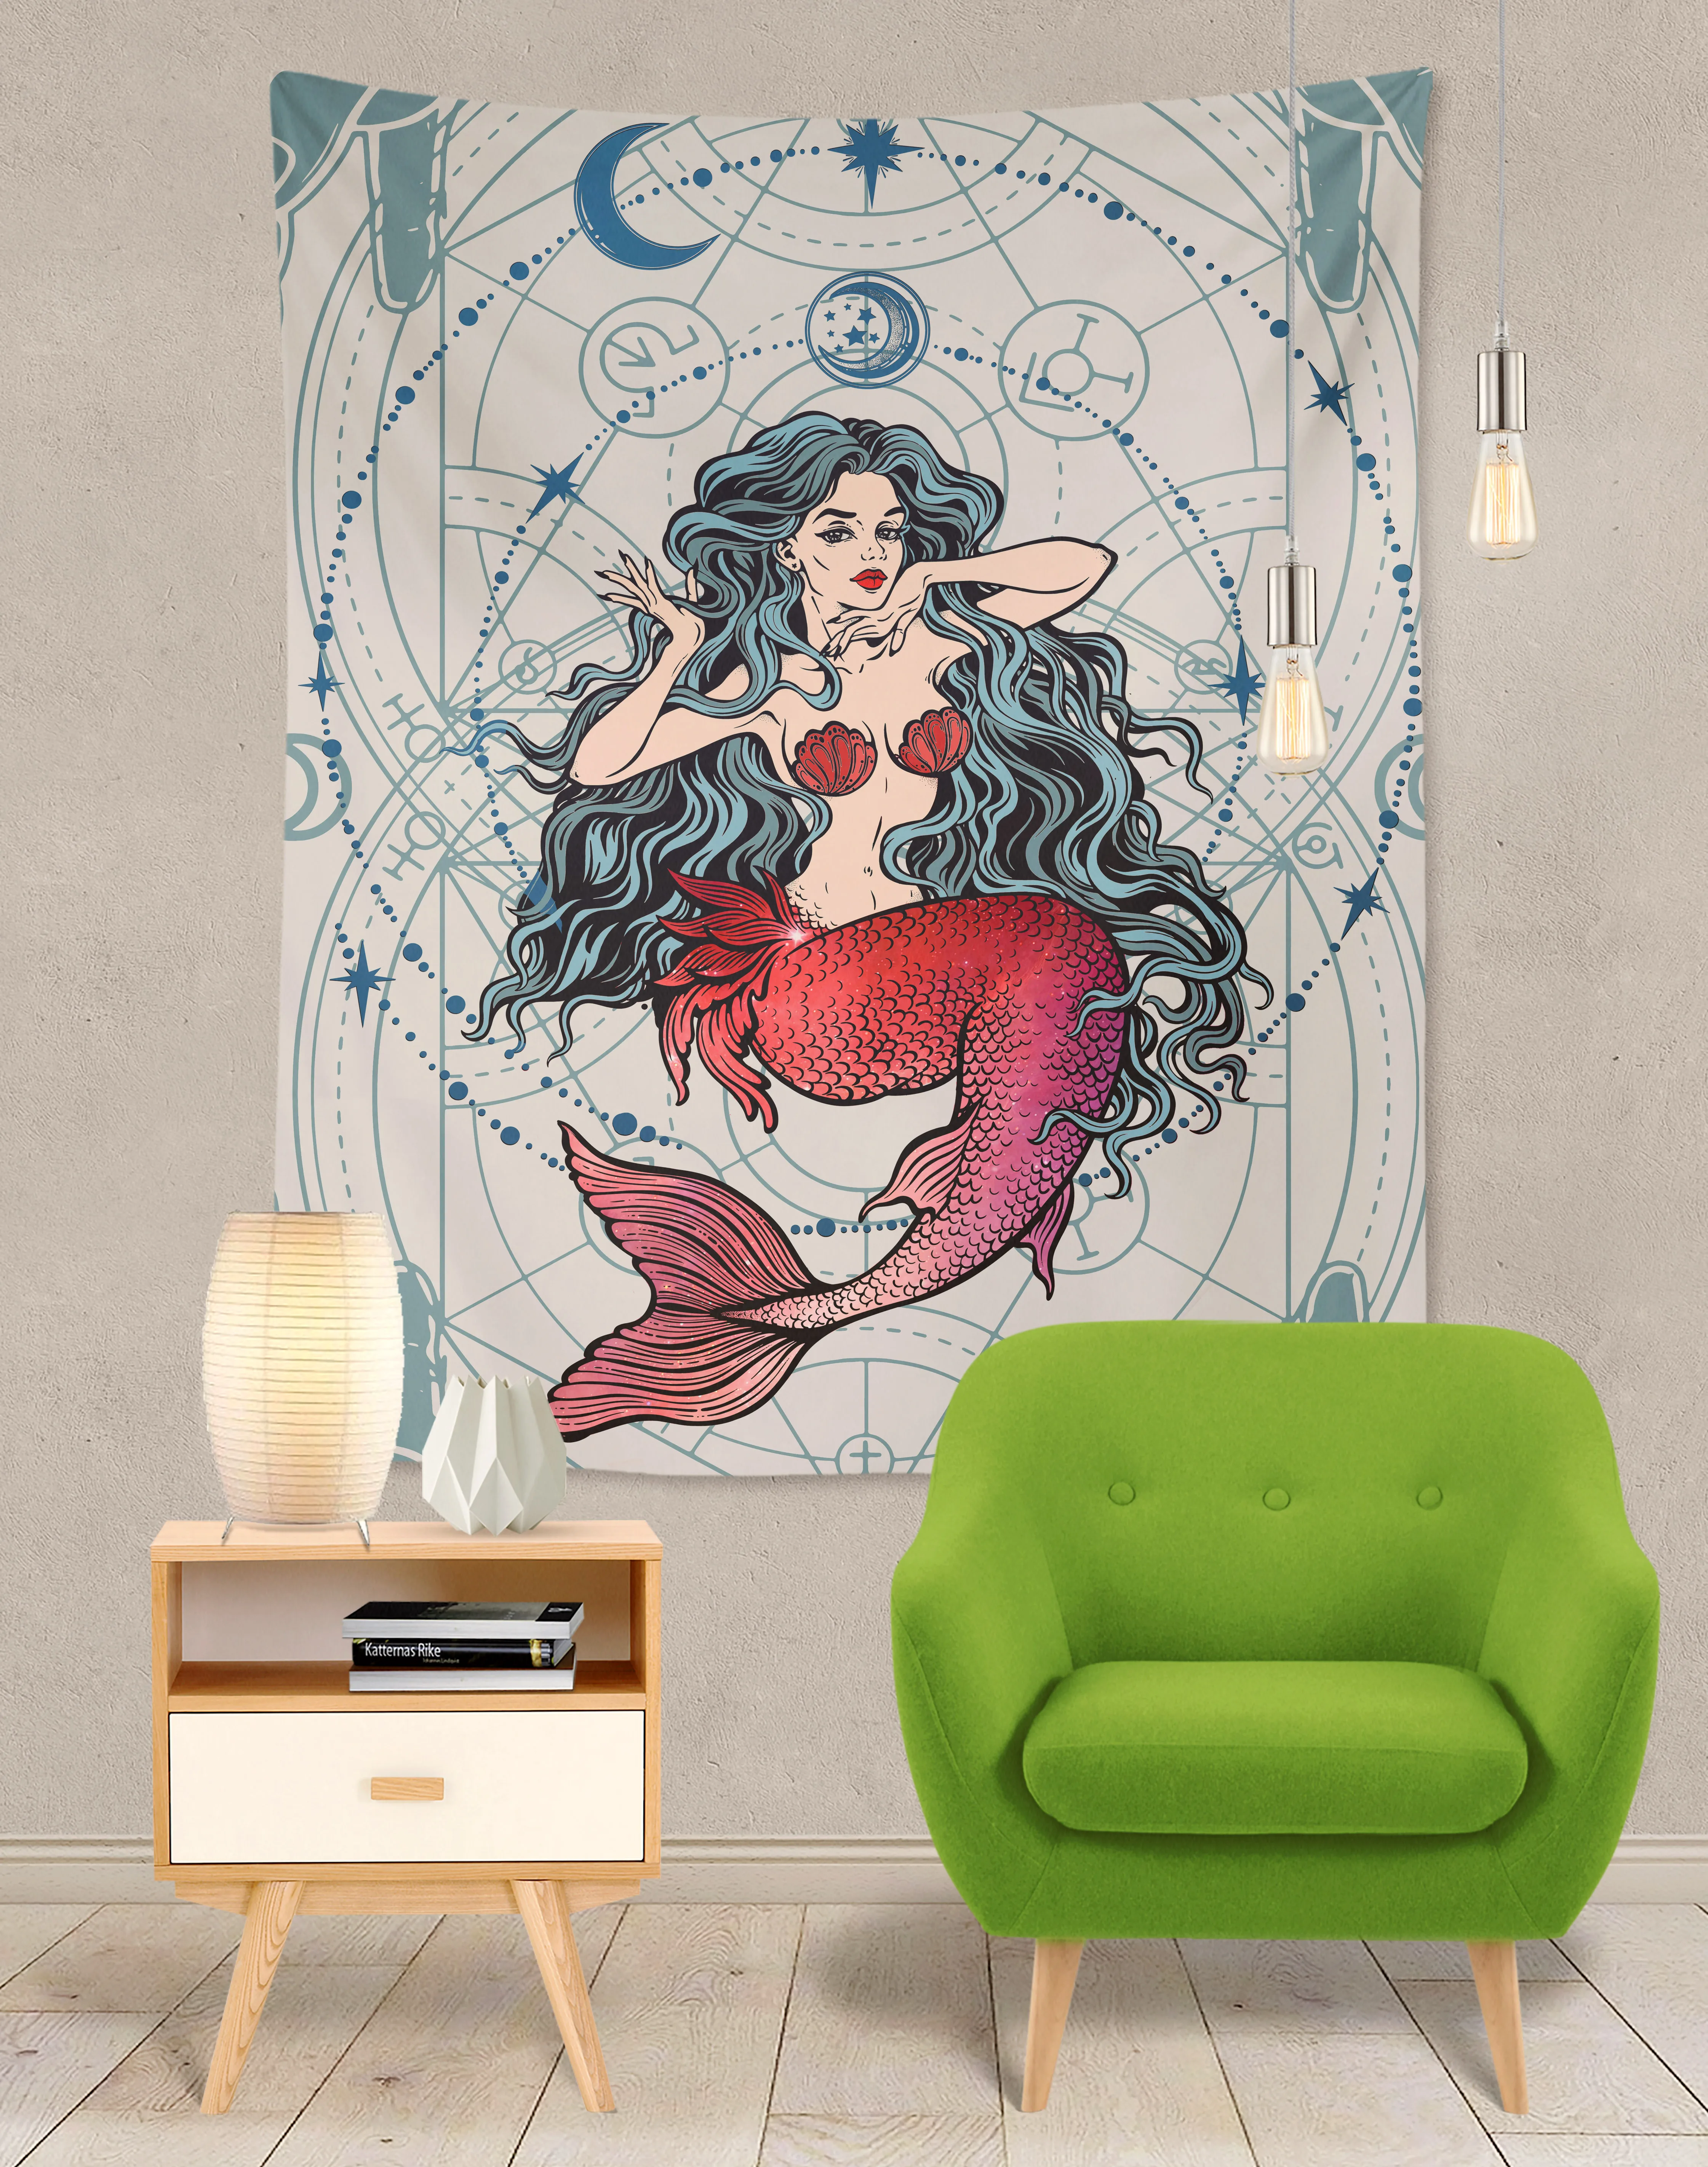 

The mermaid and moon tapestry Indian Mandala Hippie Macrame Tapestry Wall Hanging Boho decor Psychedelic Witchcraft Tapestry